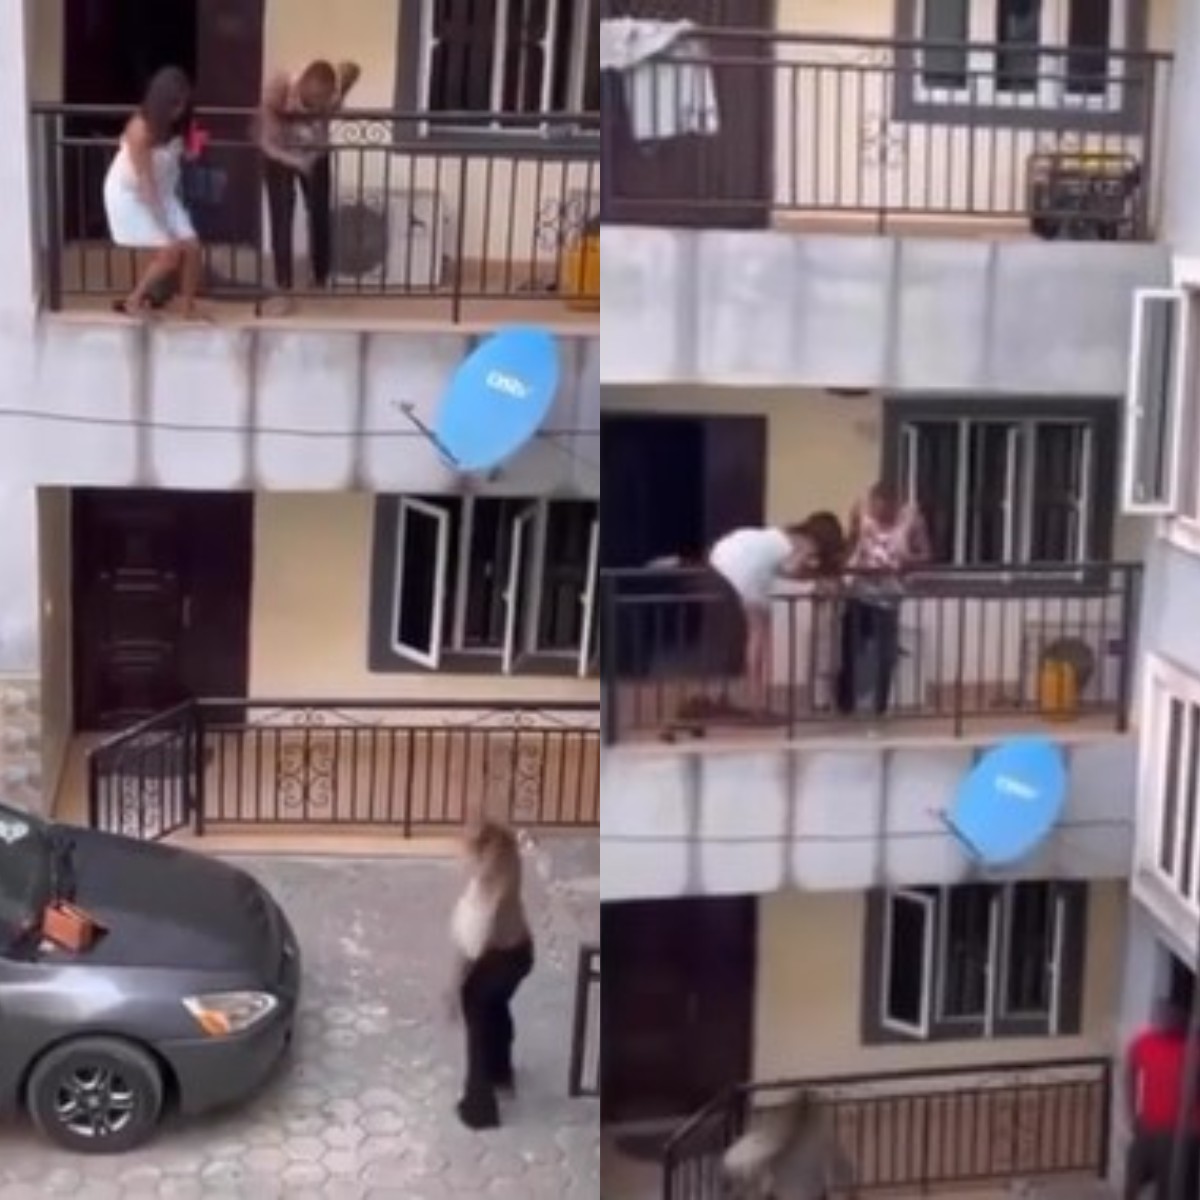 Drama As Wife Catches Husband With Another Woman In Their Home [VIDEO]  